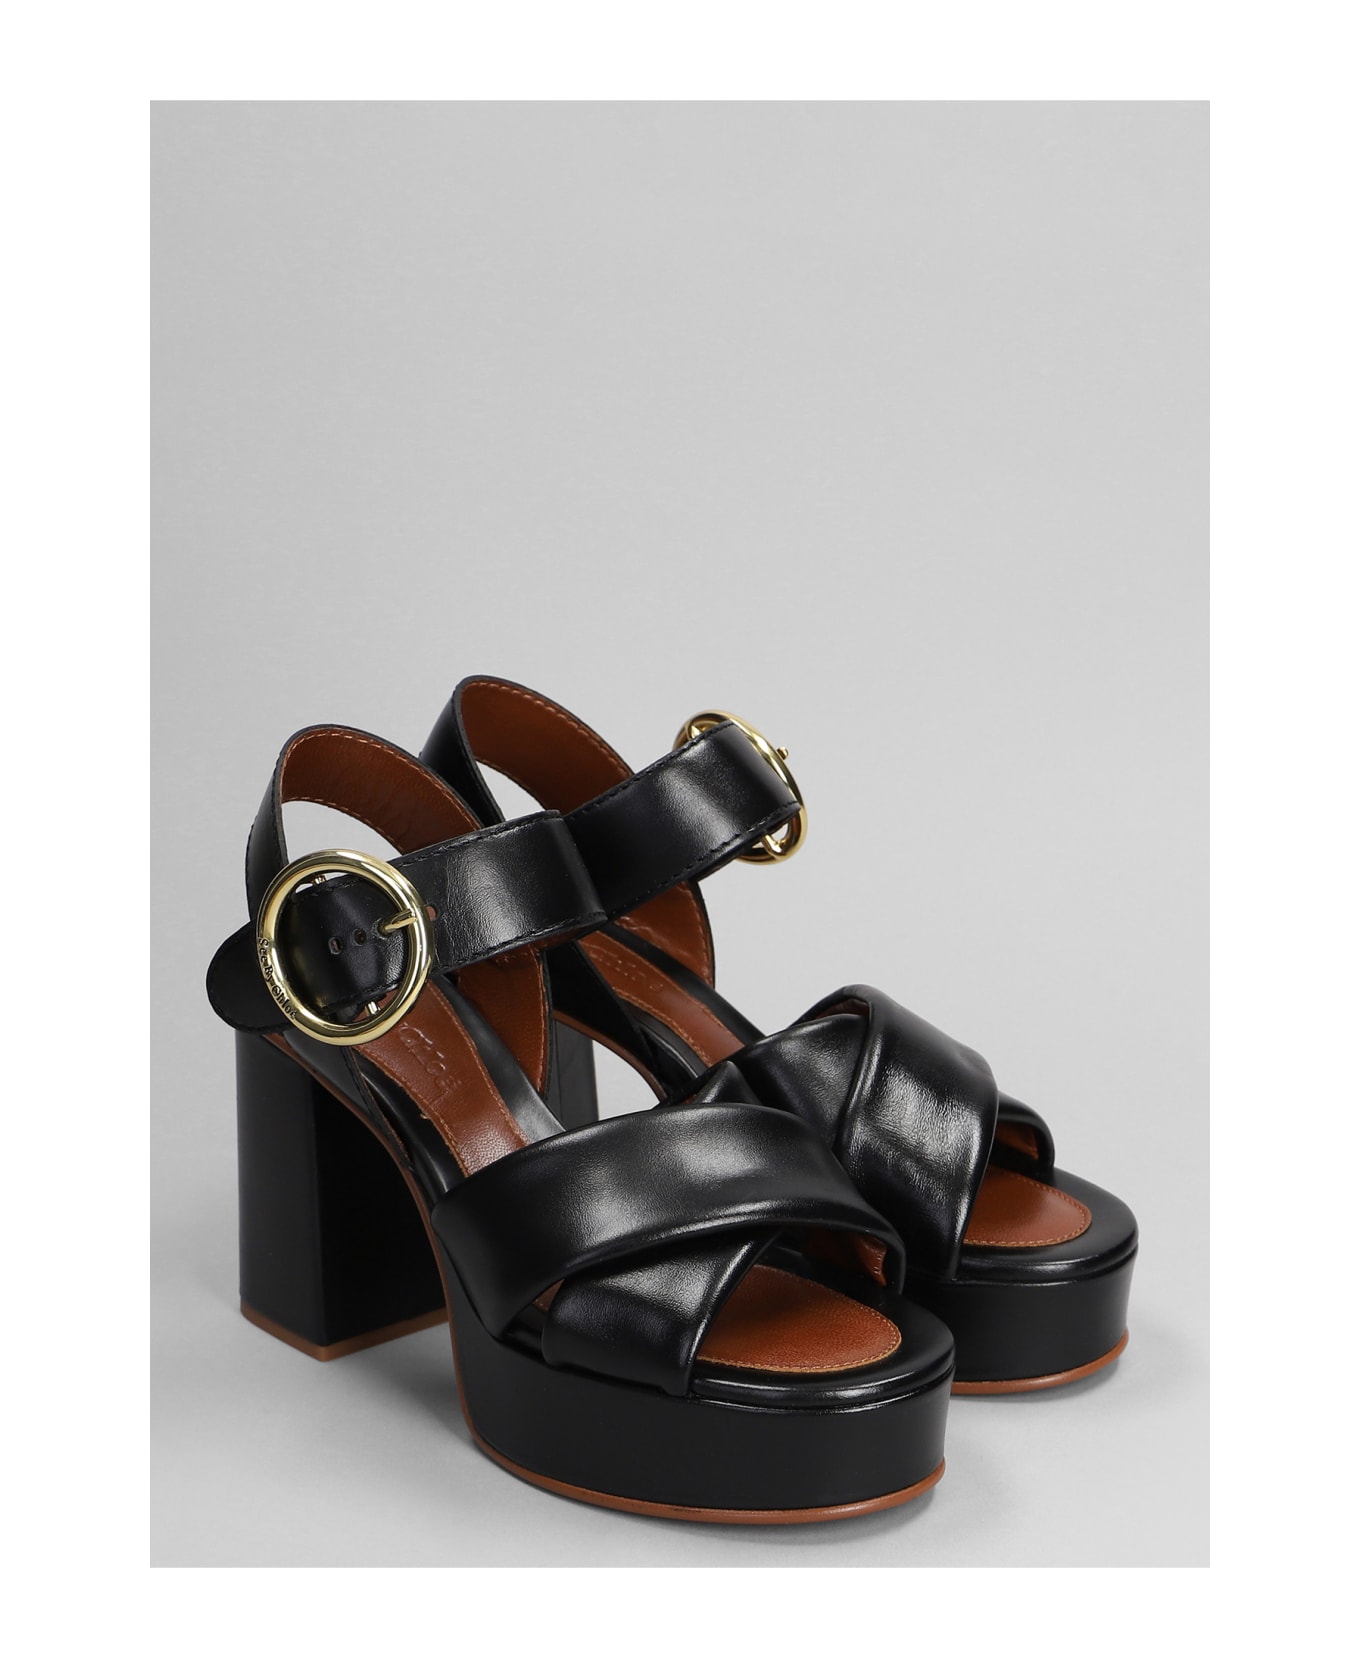 See by Chloé Lyna Sandals In Black Leather - black